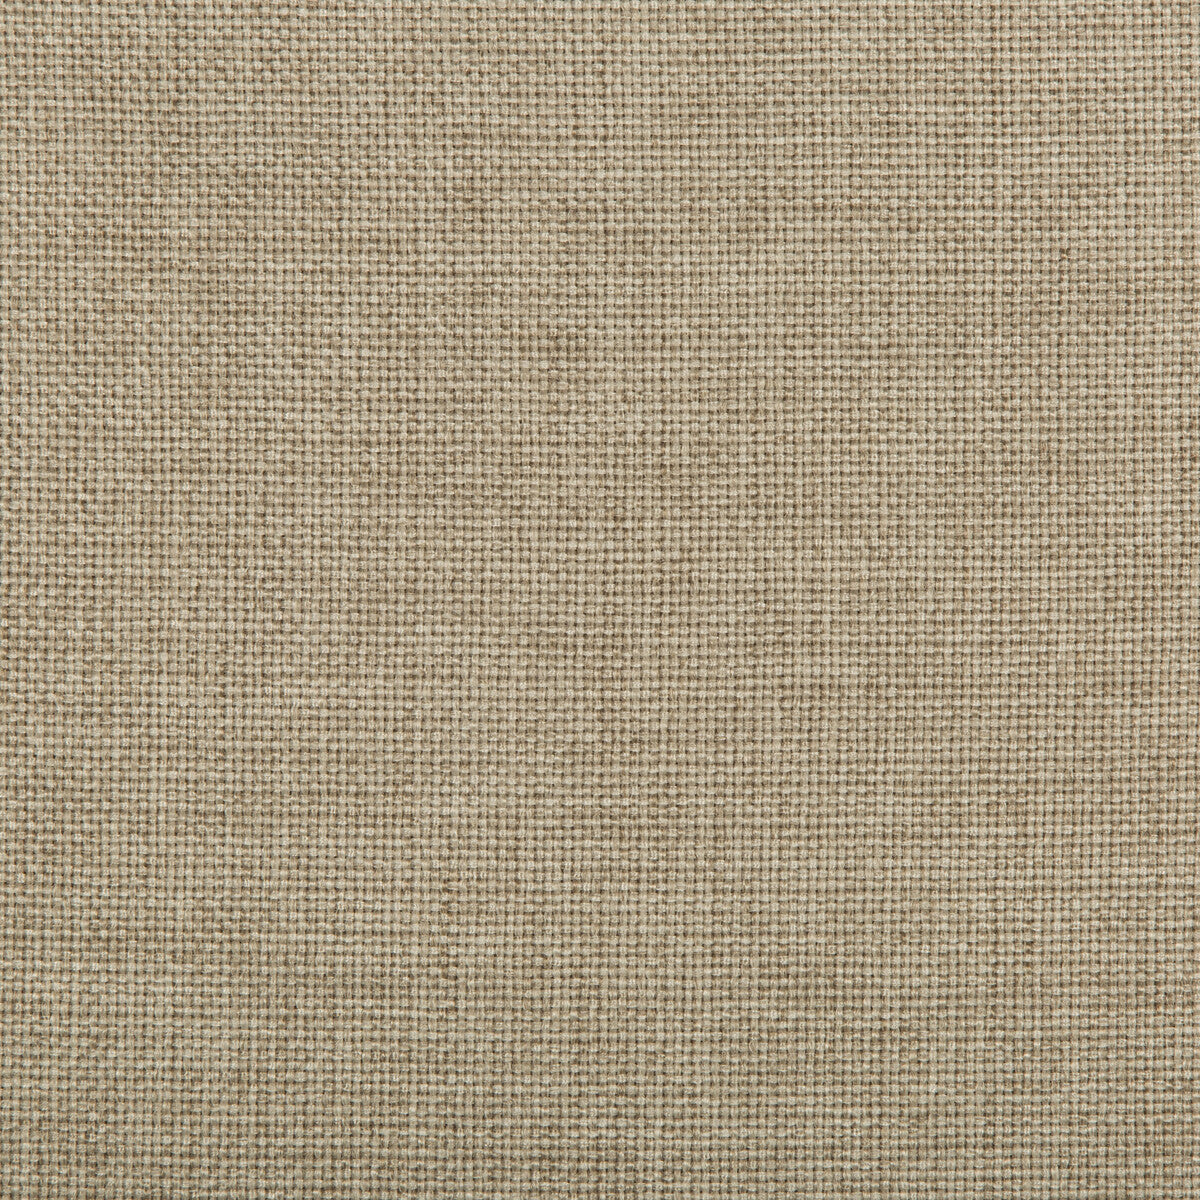 Kravet Contract fabric in 4637-106 color - pattern 4637.106.0 - by Kravet Contract